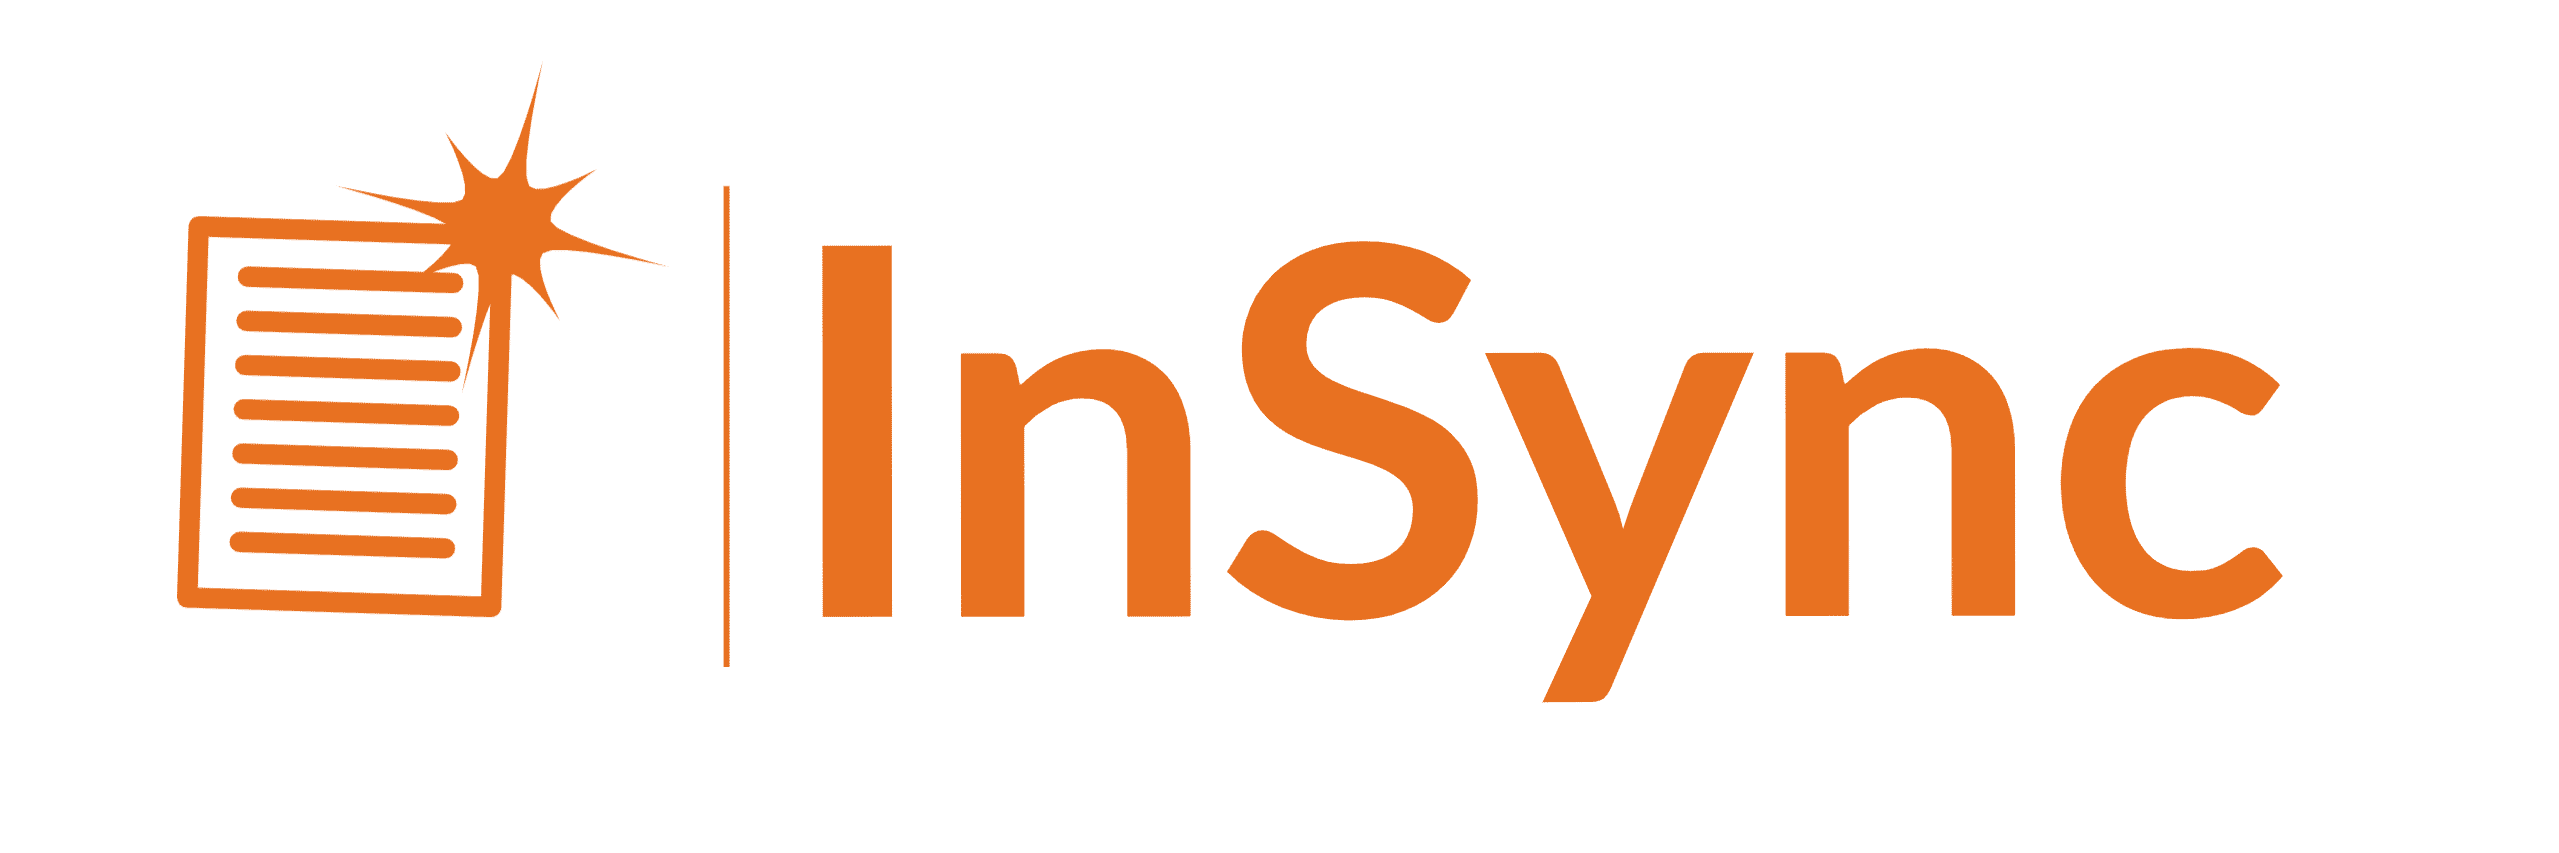 Litigation Edge Launches InSync Evidence Platform, Its Next Generation Solution for Virtual Hearings and Legal Team Collaboration